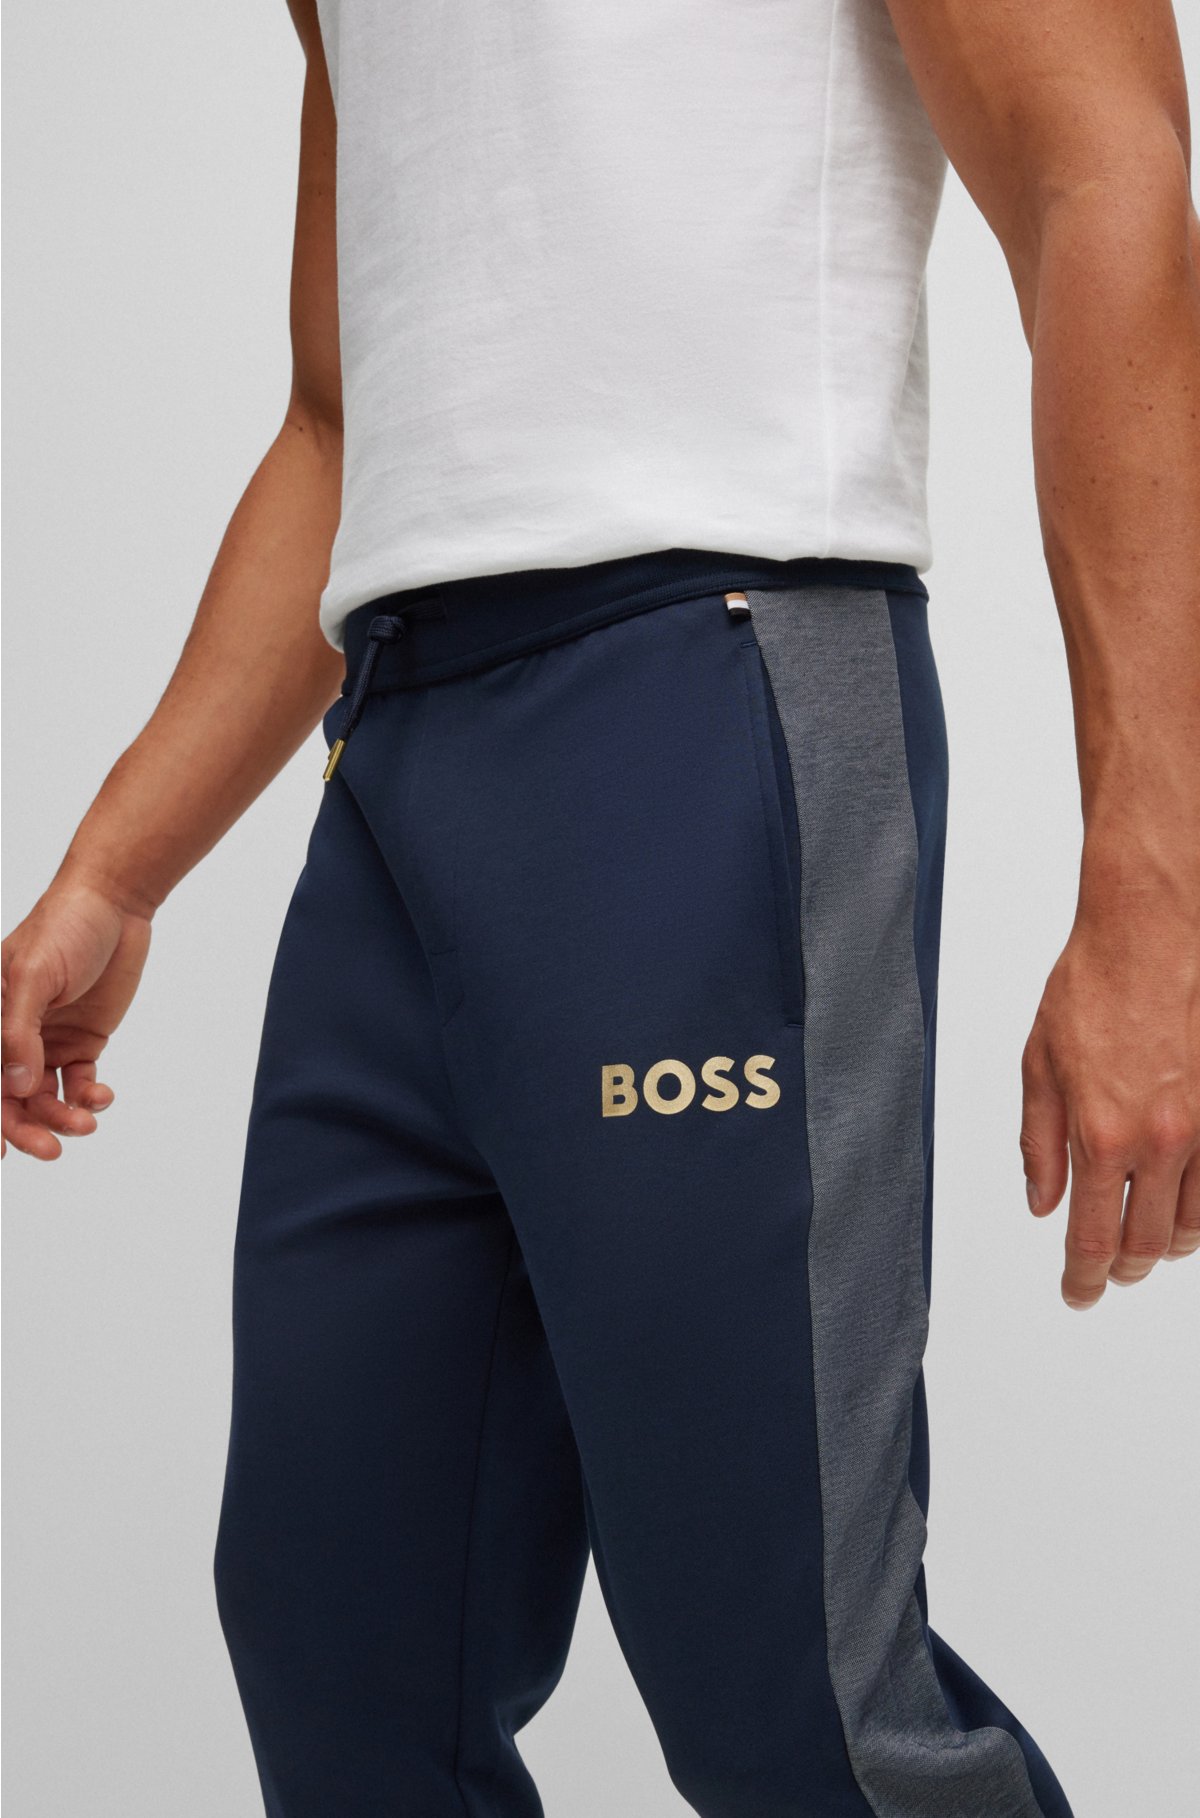 embroidered logo Sweatpants with - BOSS